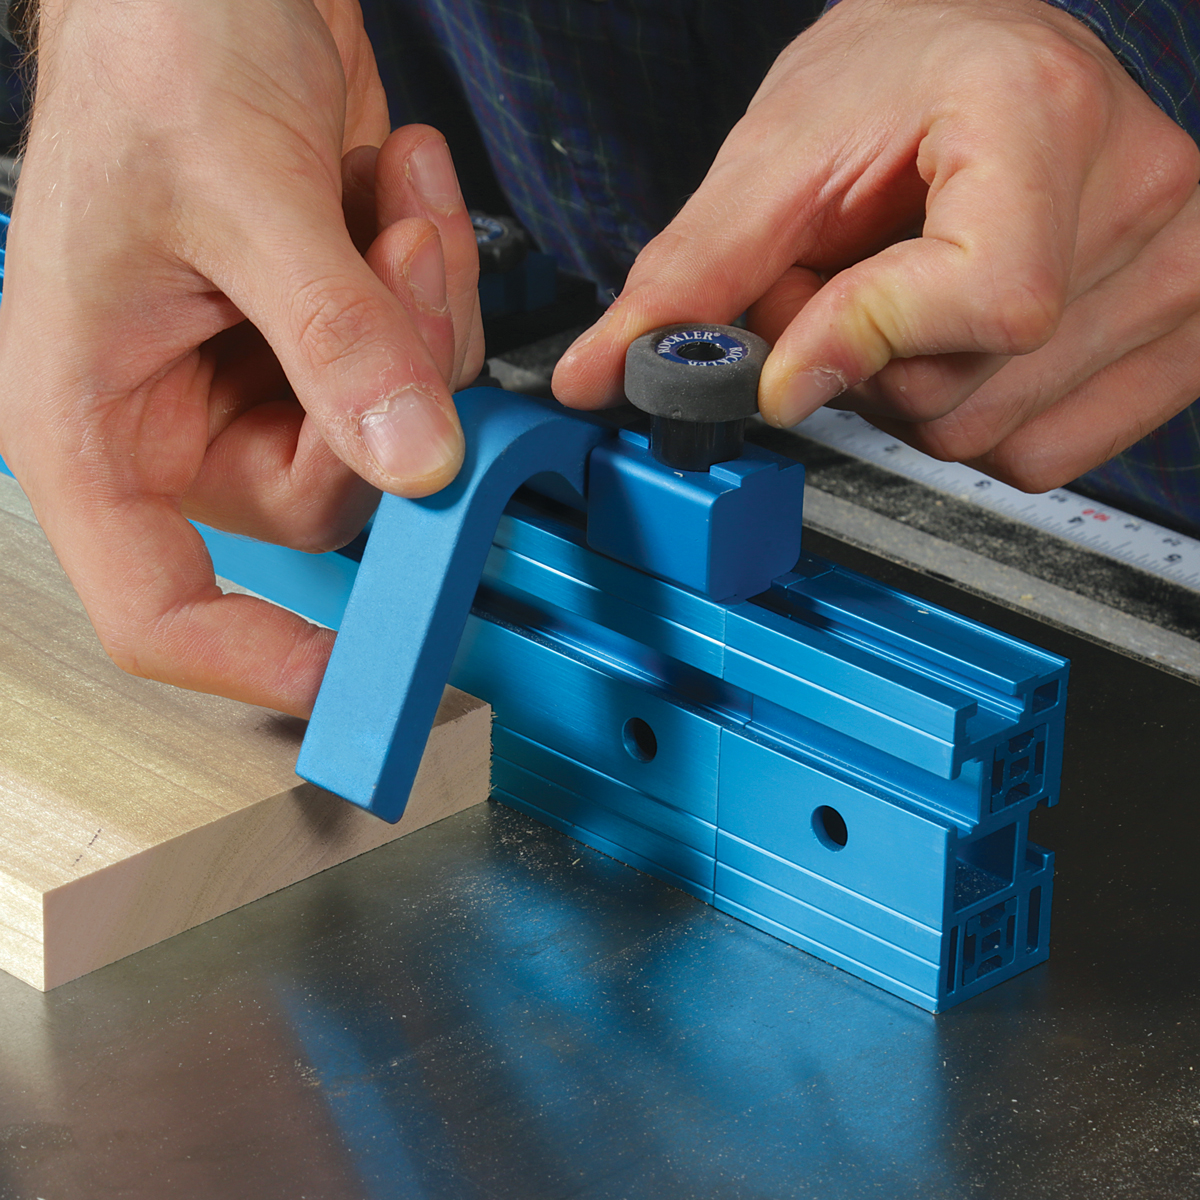 Flip stop is a convenient timesaver. With a flip stop, you can alternate between squaring the ends of boards and cutting them to equal length without the stop getting in the way or you losing your setting.